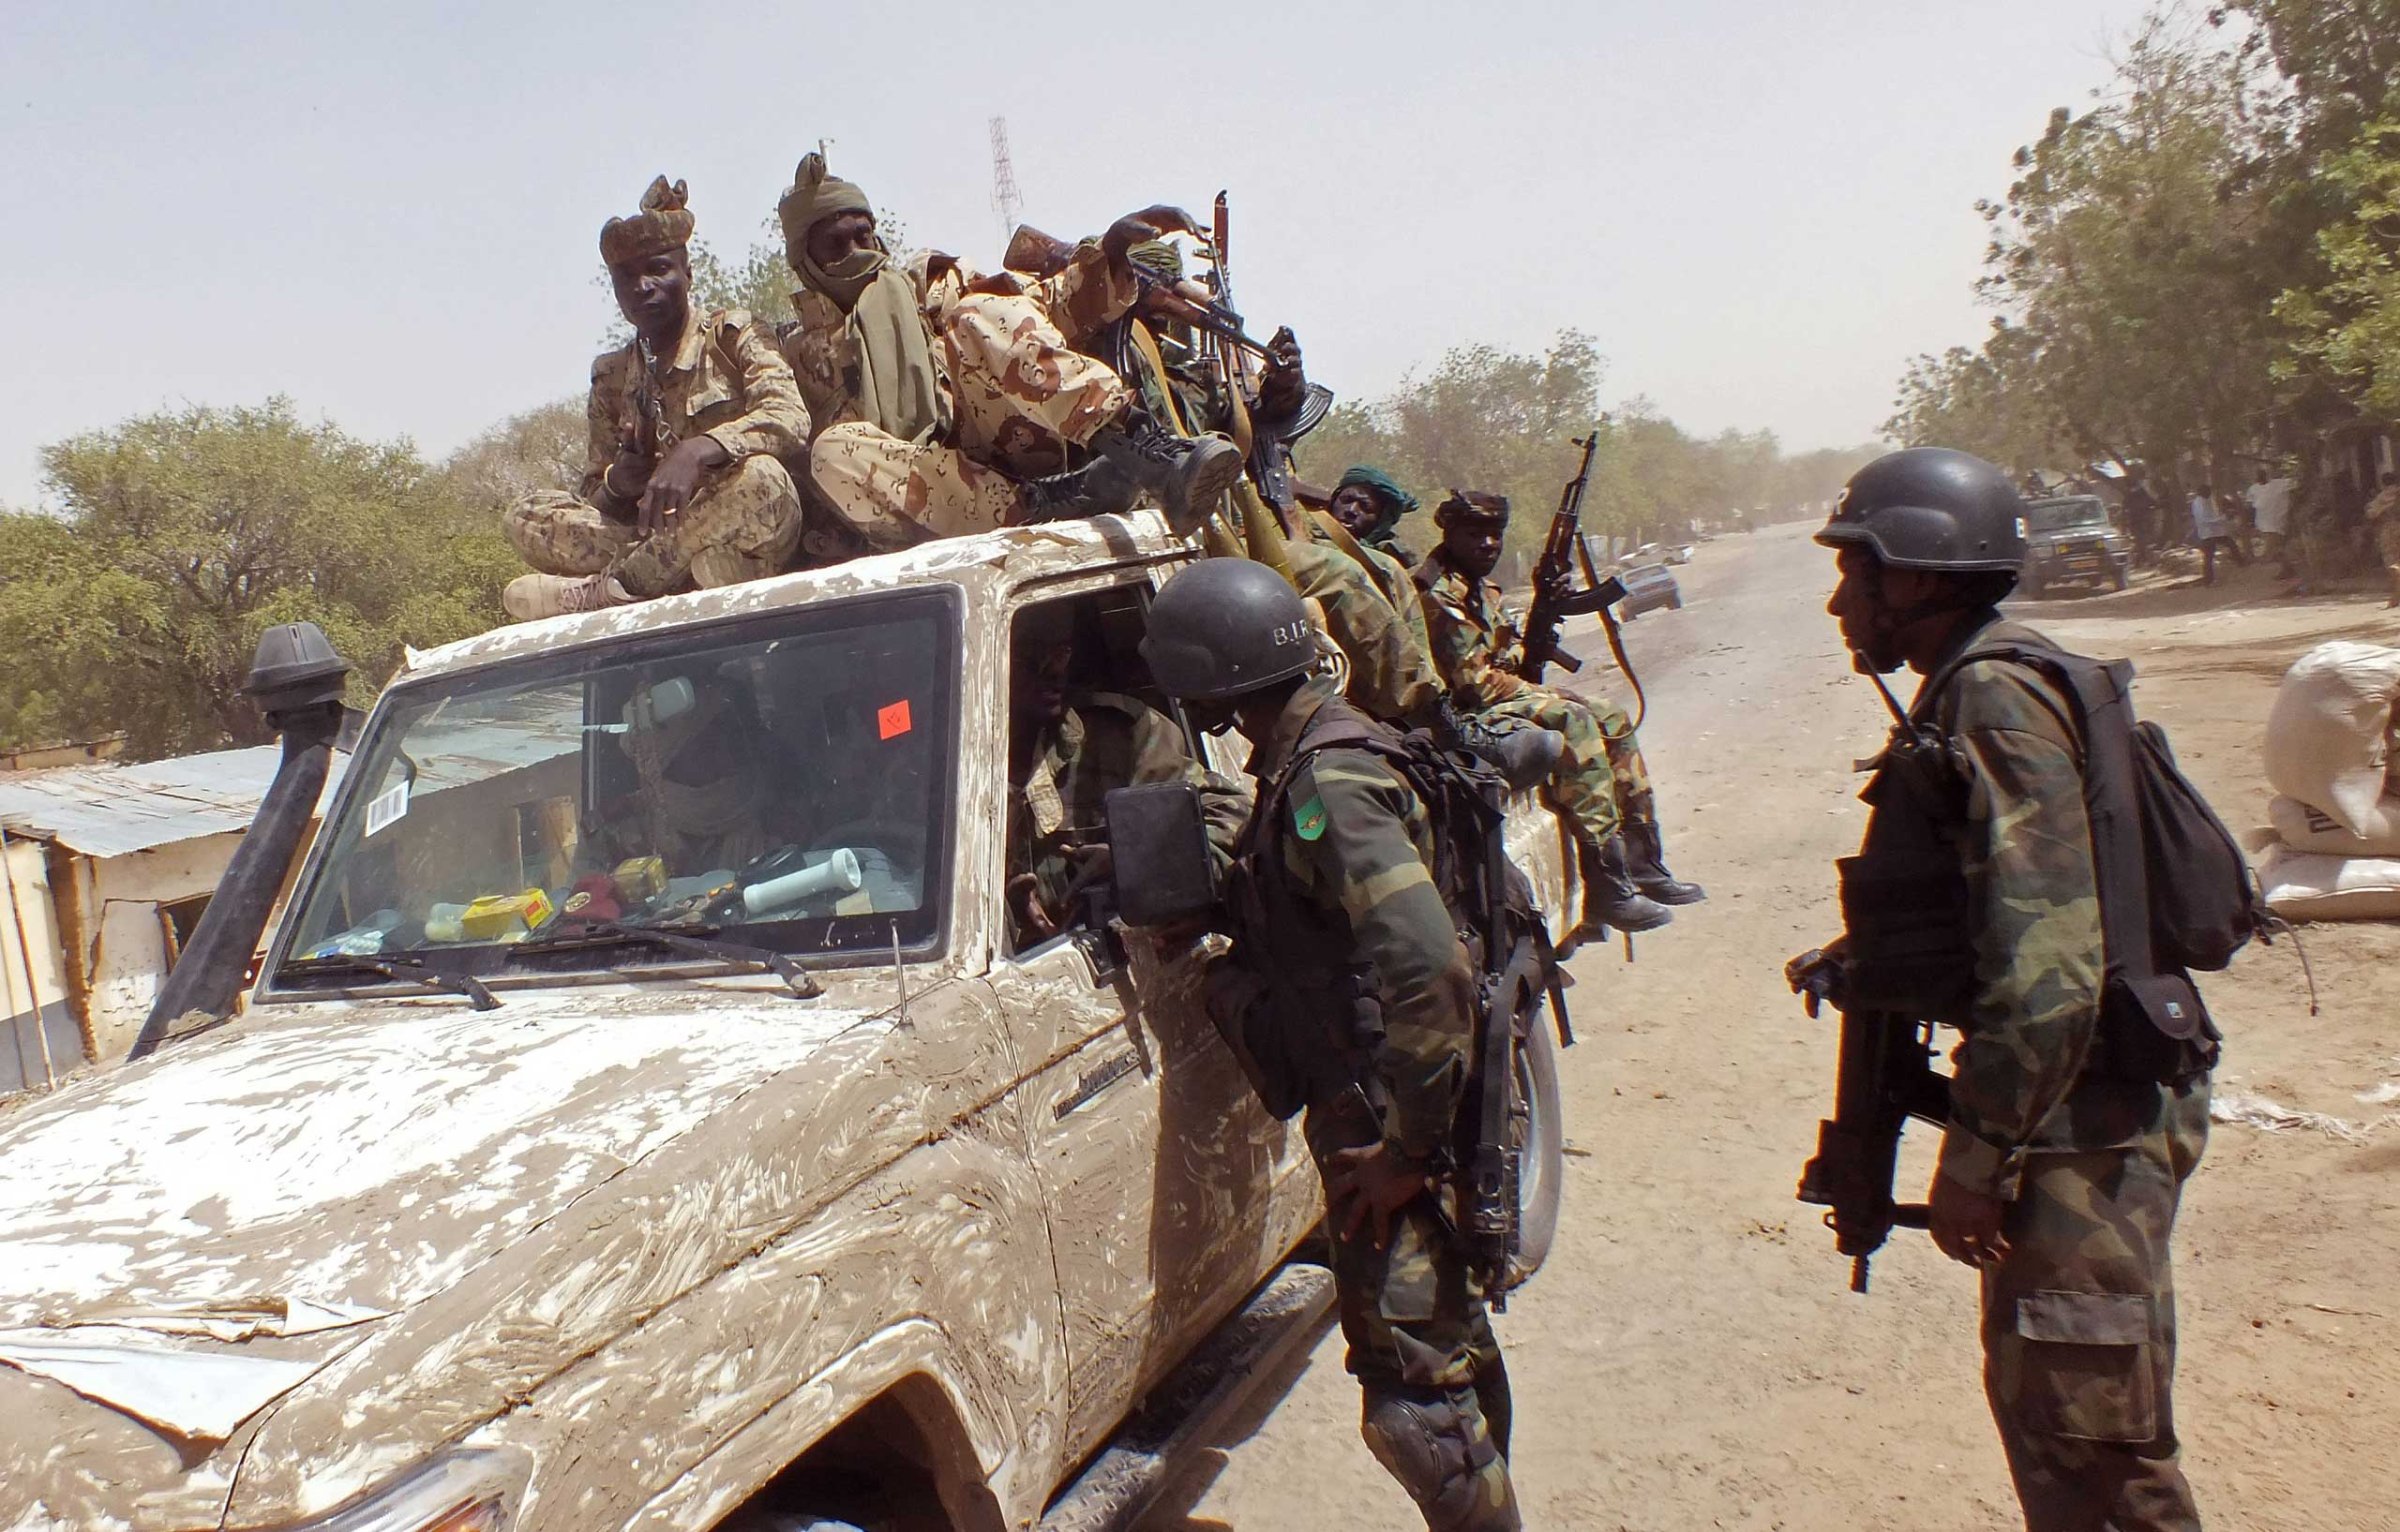 Chadian soldiers on top of a truck, left, speak to Cameroon soldiers, right, standing next to the truck, on the border between Cameroon and Nigeria as they form part of the force to combat regional Islamic extremists force's including Boko Haram, near the town of Gambarou, Nigeria, Feb. 19, 2015.